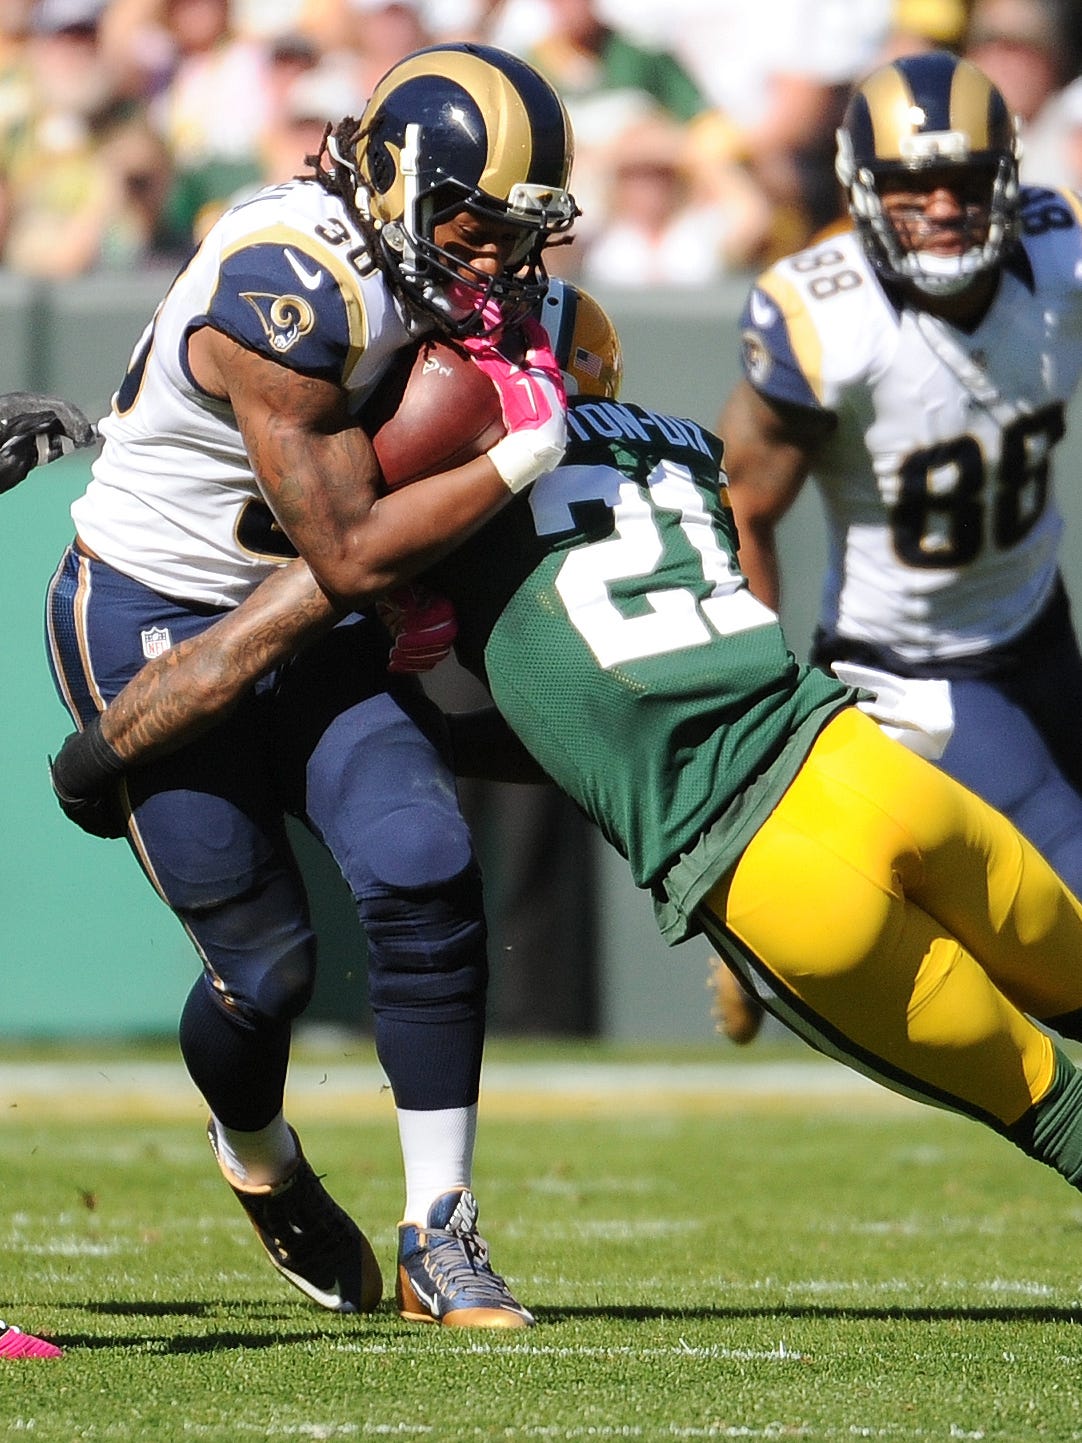 Todd Gurley, shown during an October 2015 game against the Packers, returned to his rookie form last season, finishing with 1,305 yards and 13 touchdowns.